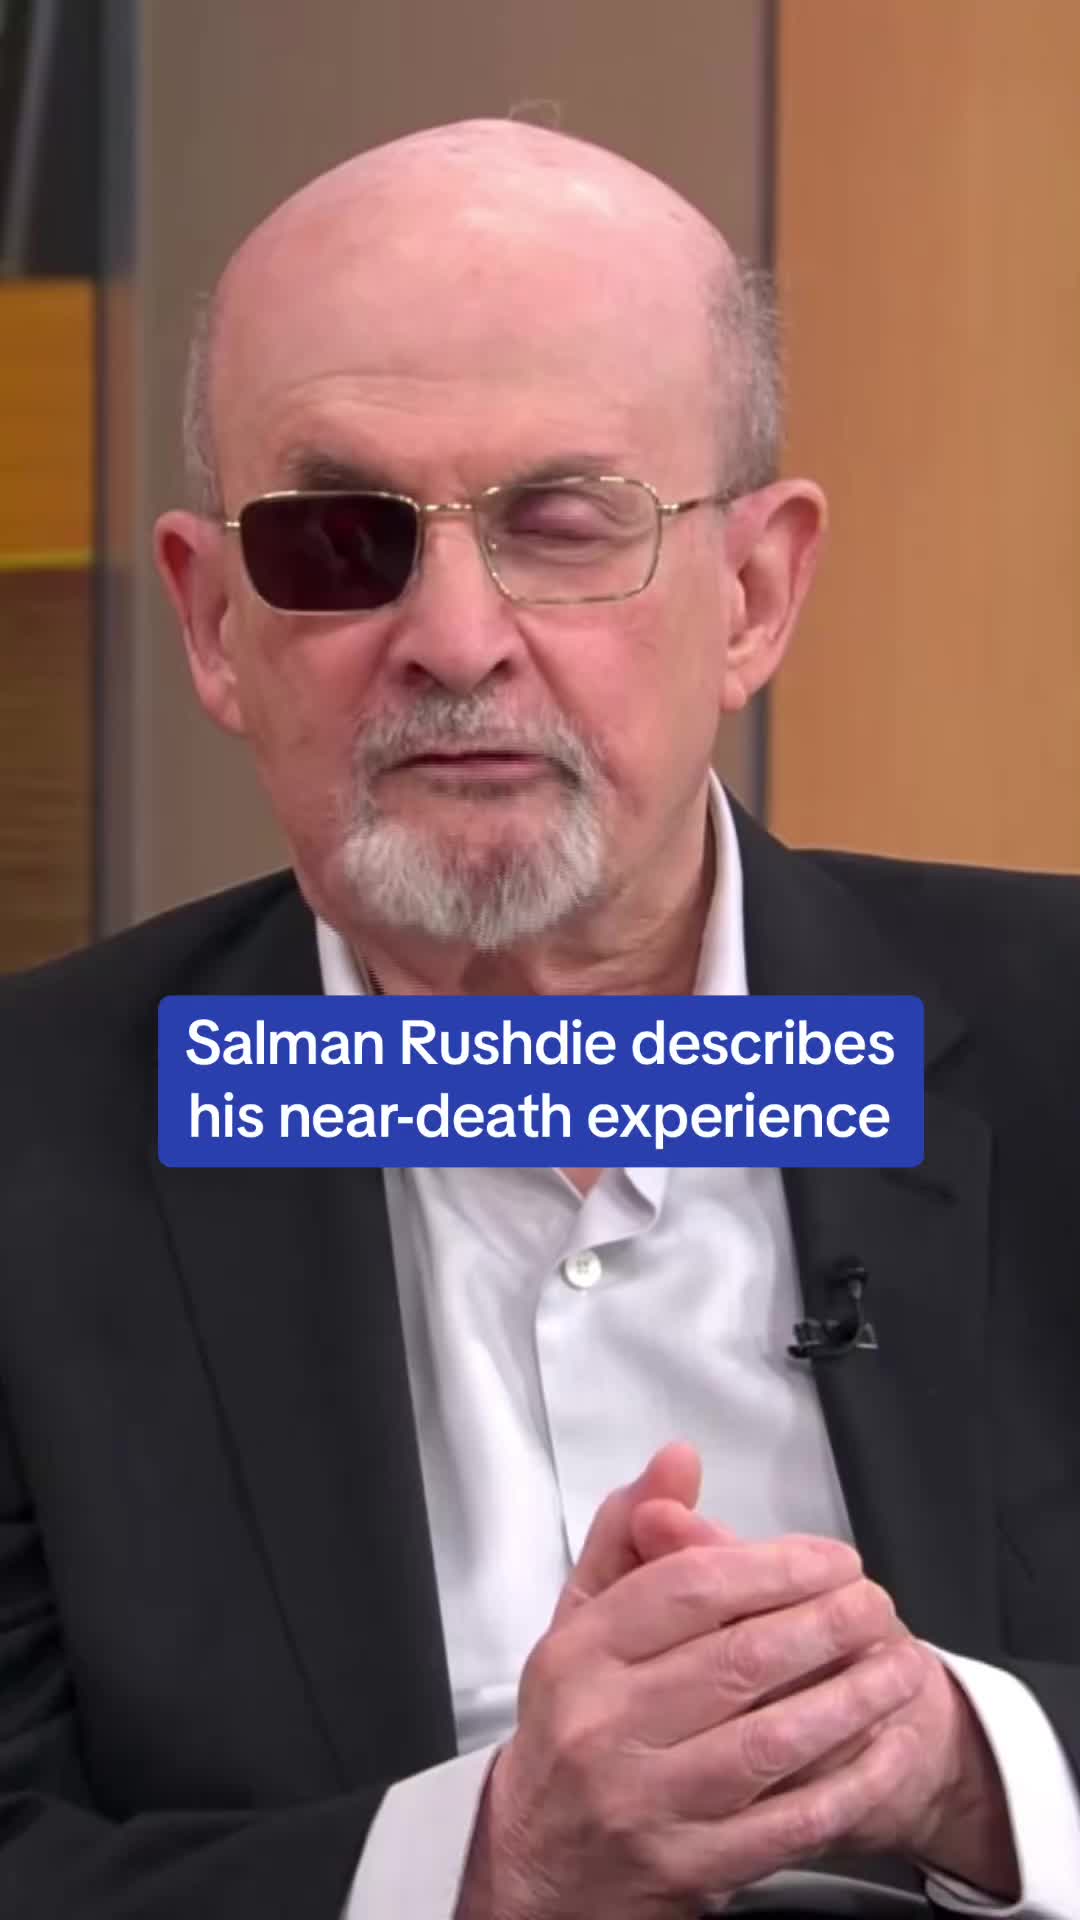 Salman Rushdie nearly died after being stabbed more than a dozen times in 2022. He describes how he fought to survive during and after the attack: “I also had this little voice in my head going, ‘Live.’” #salmanrushdie